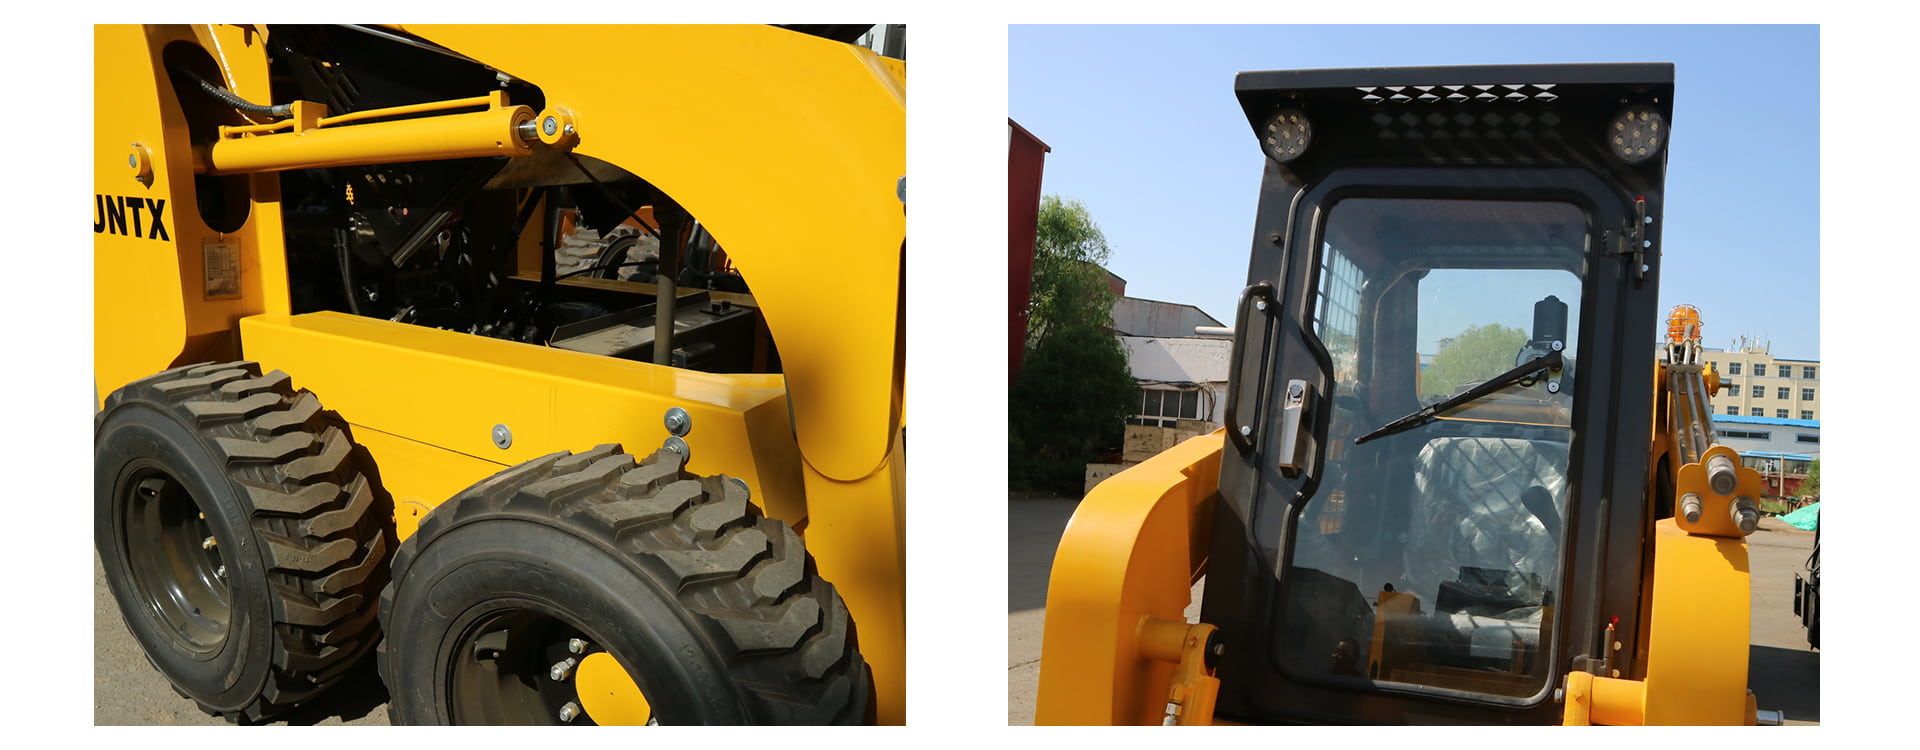 Runtx brand skid steer loaders durability and reliability